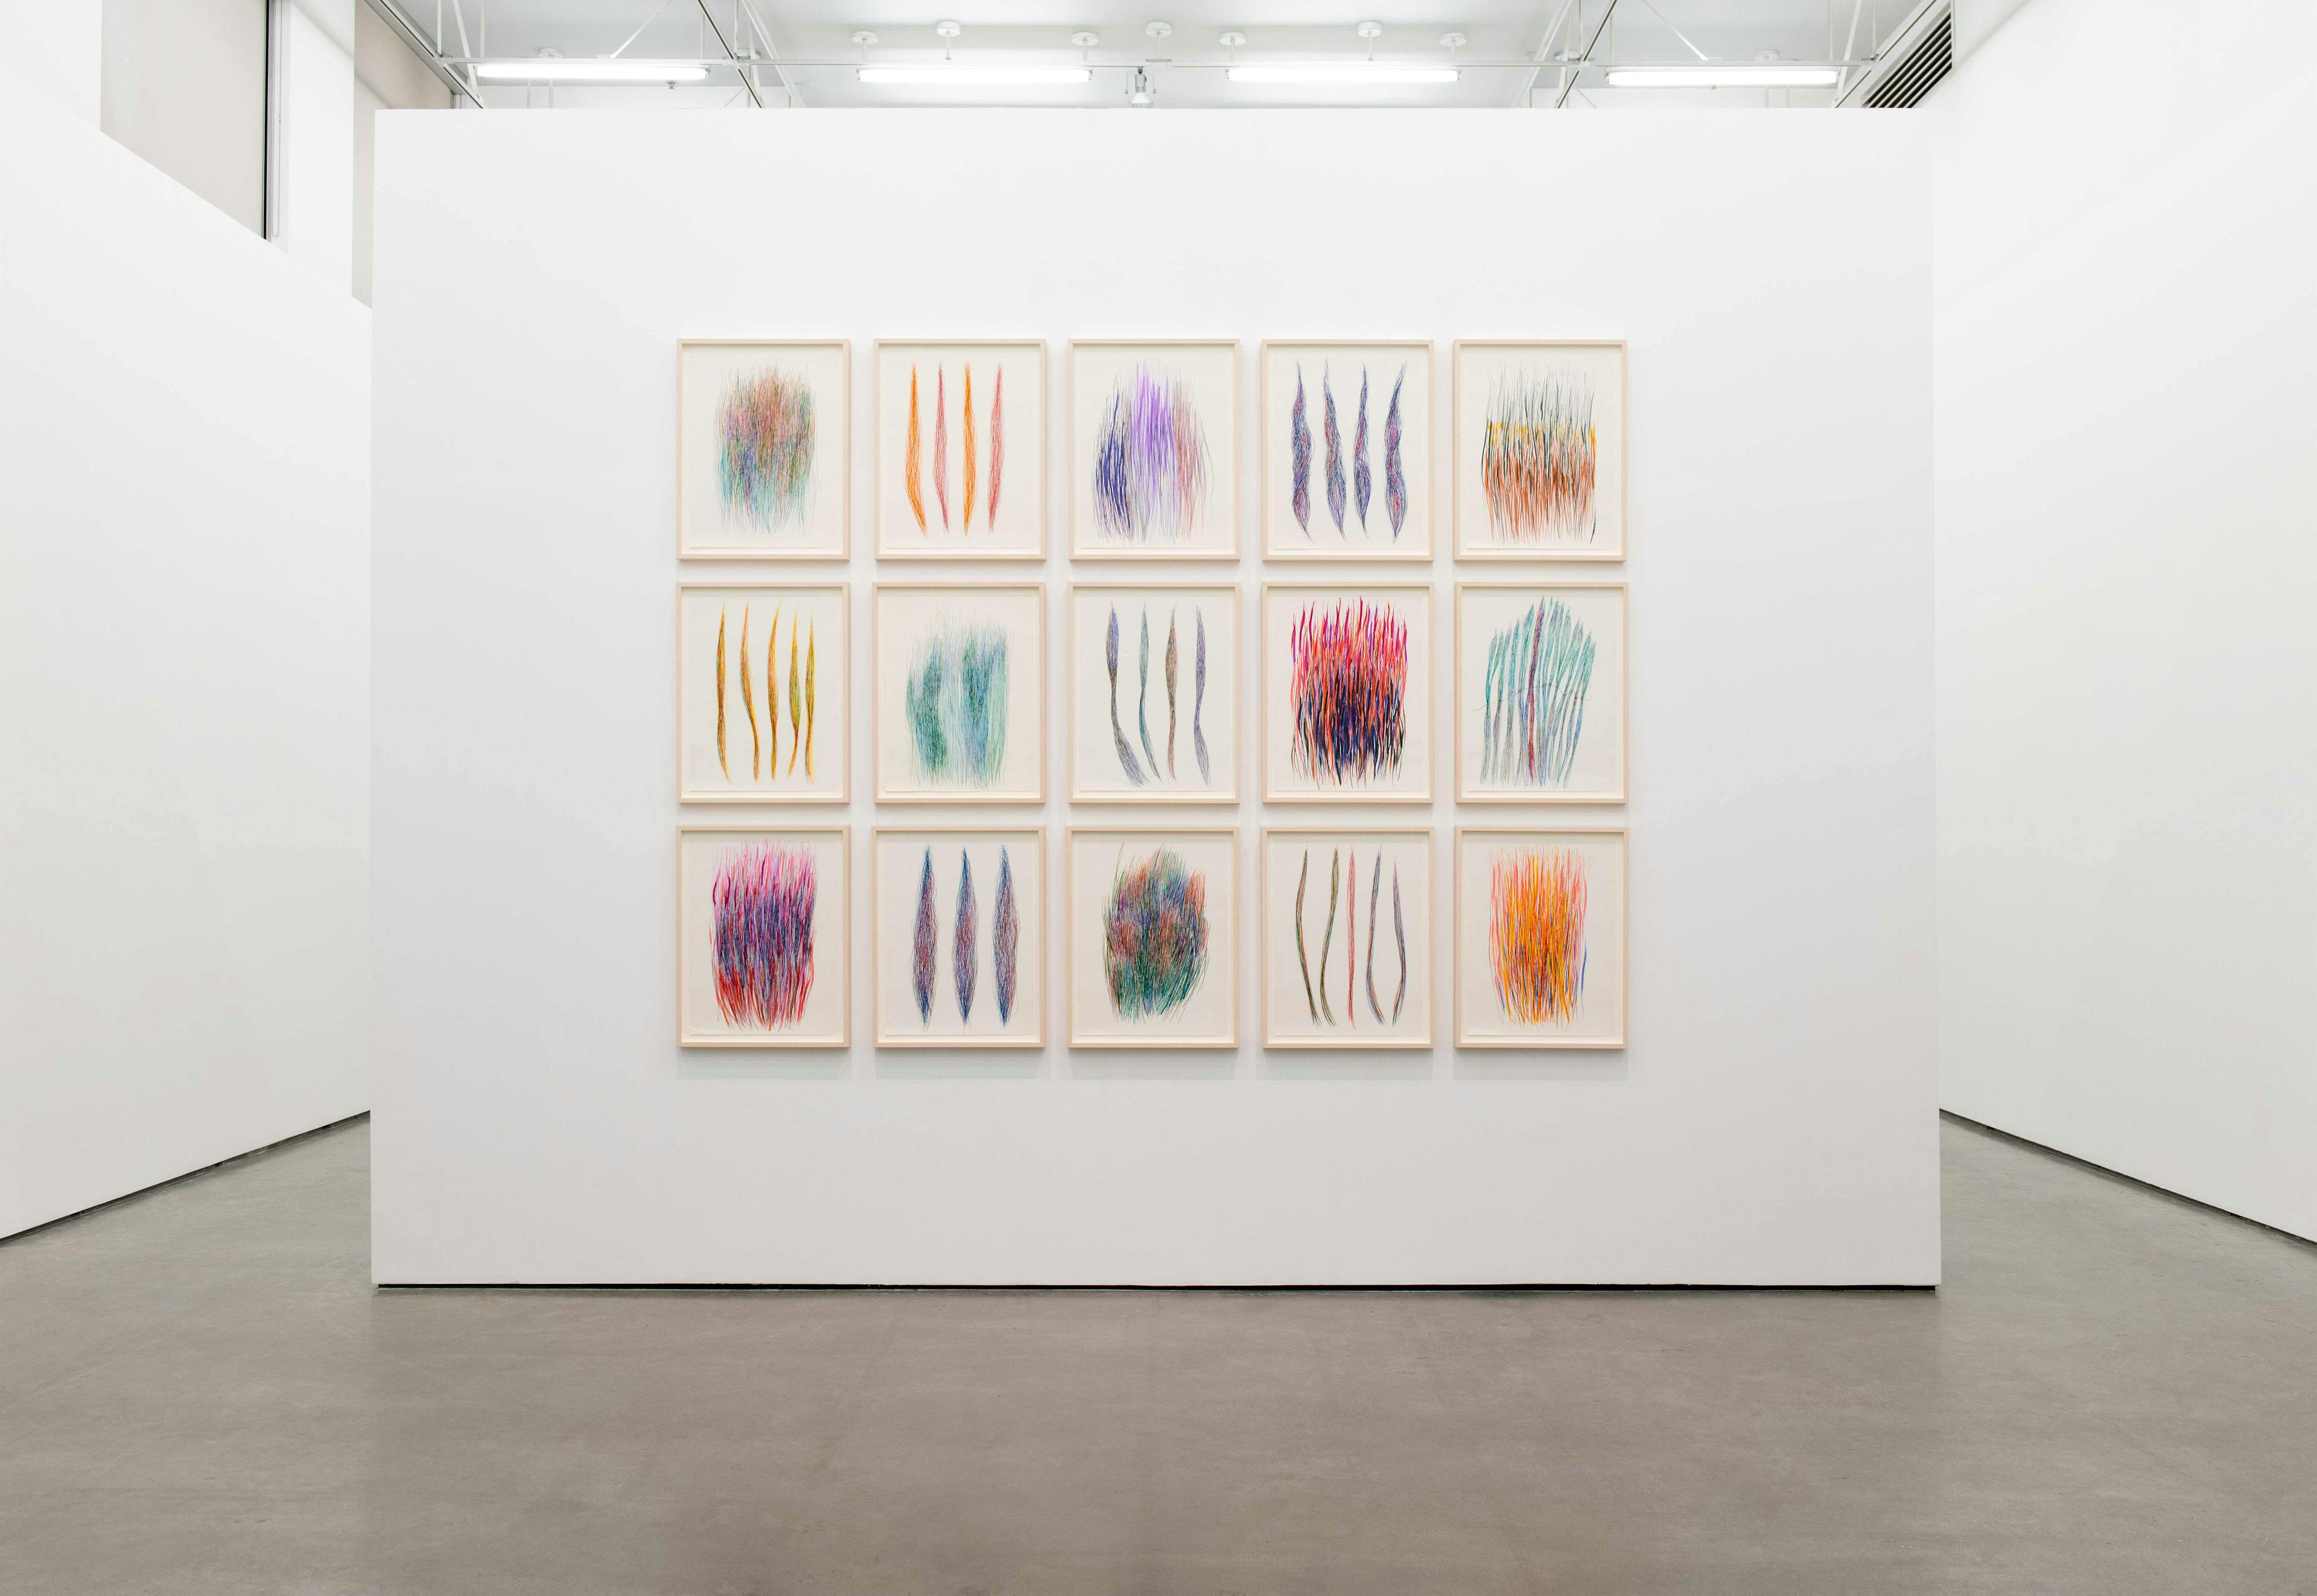 This is an installation view of Charlene Vickers’ drawings. 15 framed drawings of dense vertical lines made with coloured markers hang in a grid on a white wall. 